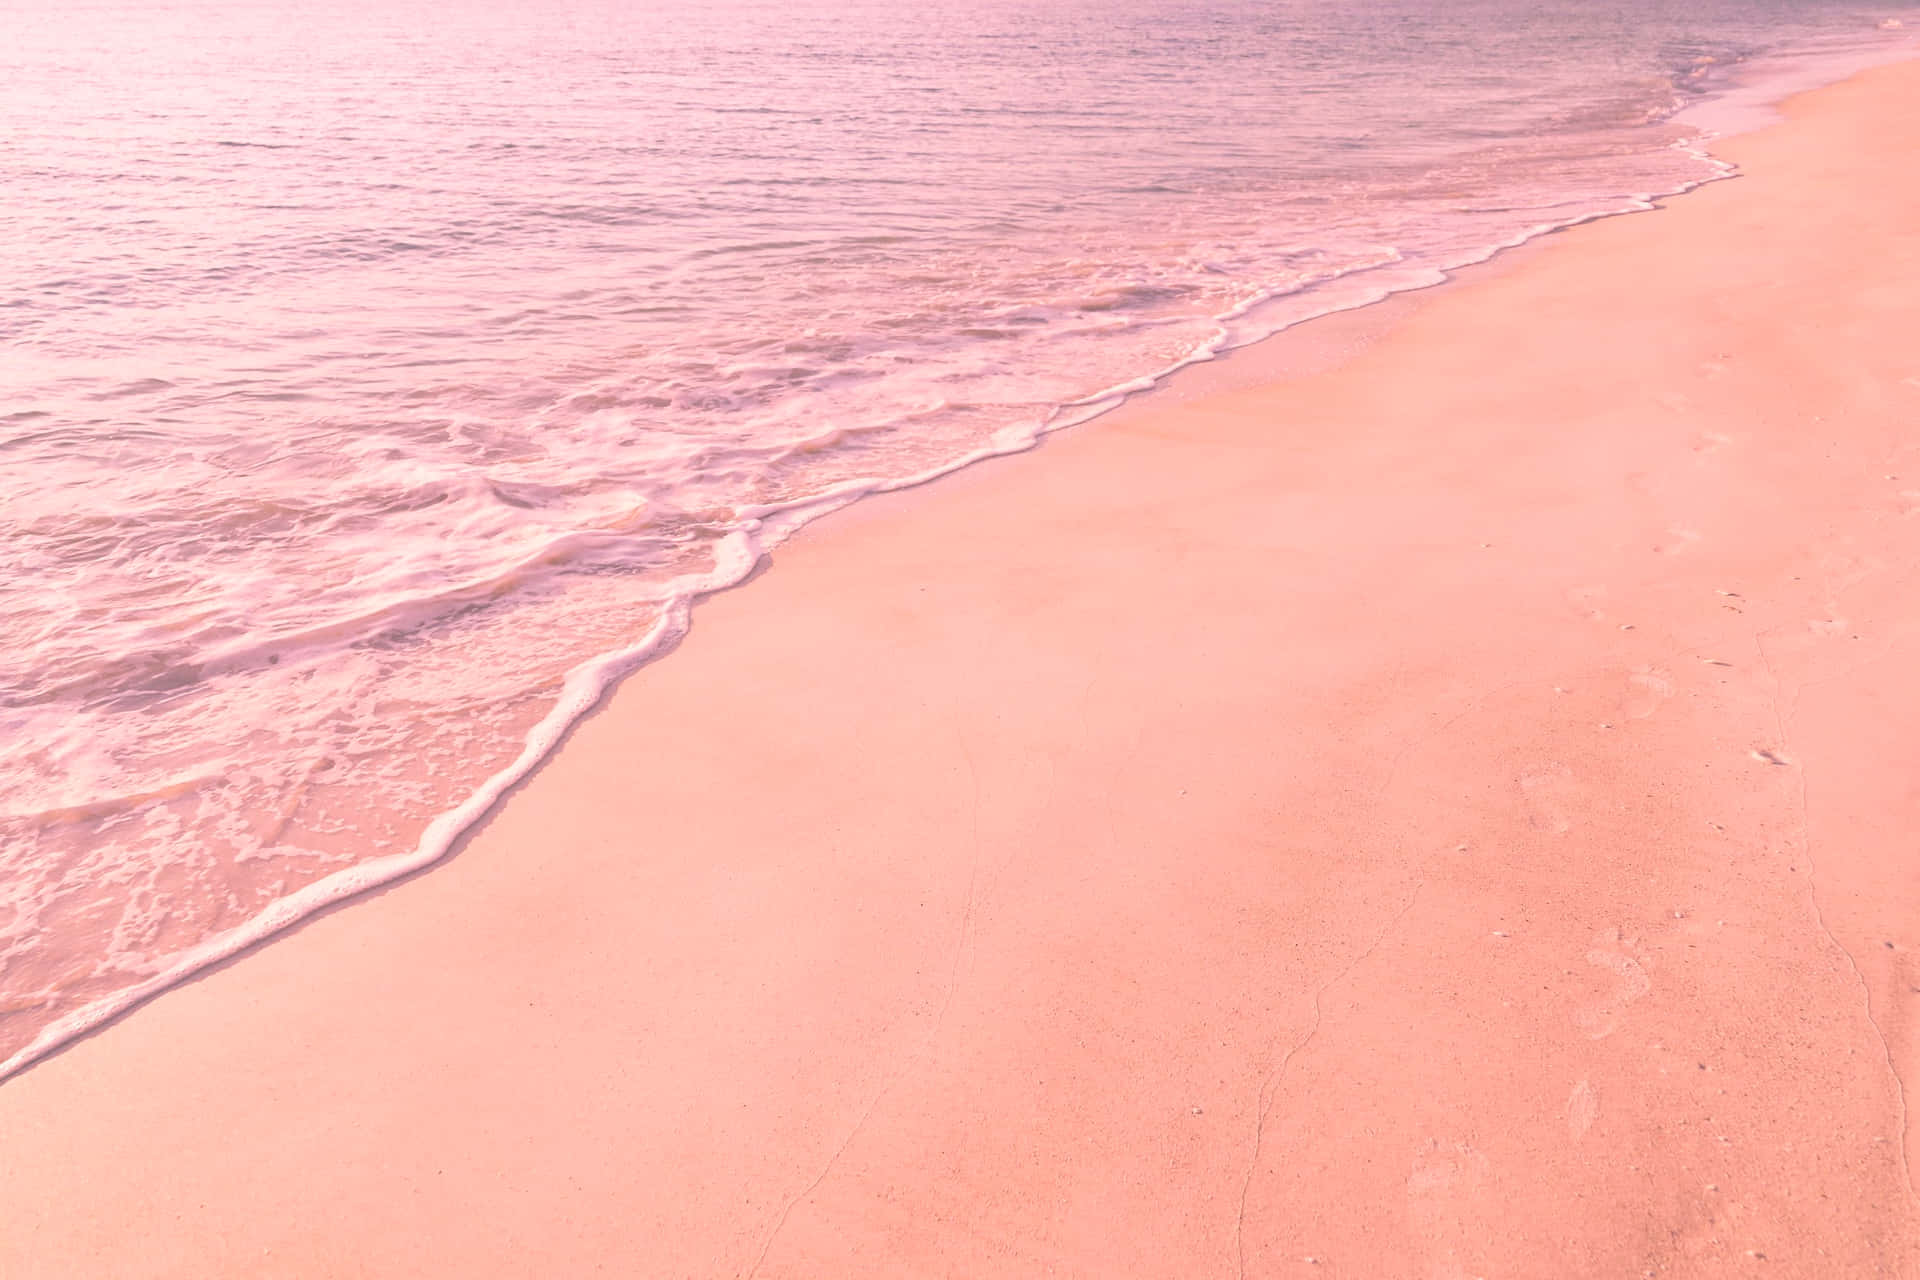 “The Wonders of Nature: A Pink Beach Aesthetic” Wallpaper